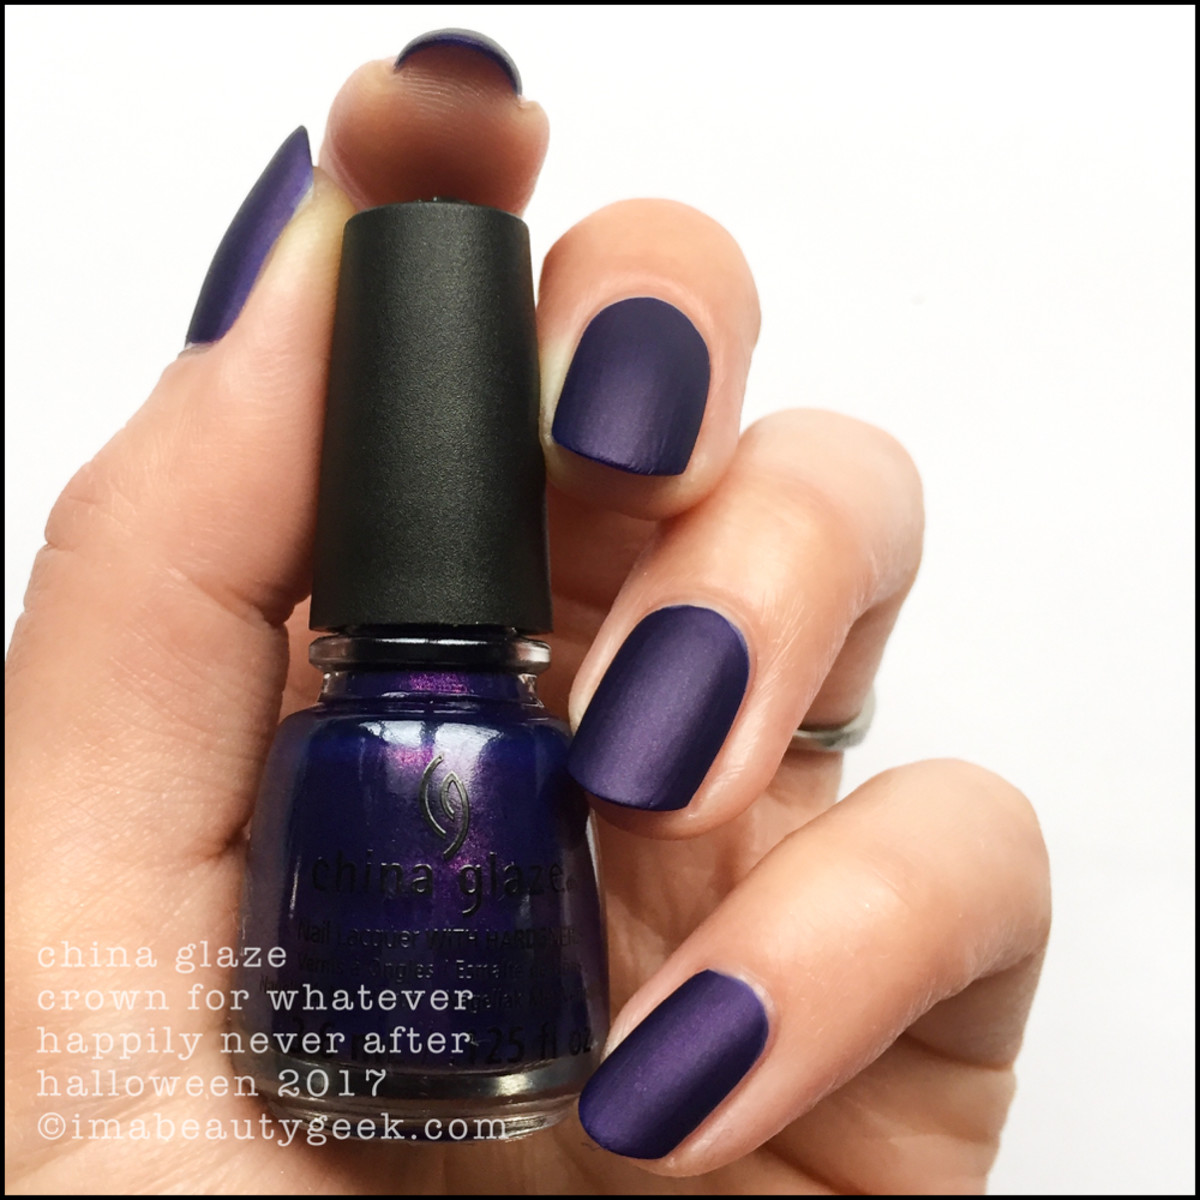 China Glaze Crown for Whatever _ China Glaze Happily Never After Collection Halloween 2017